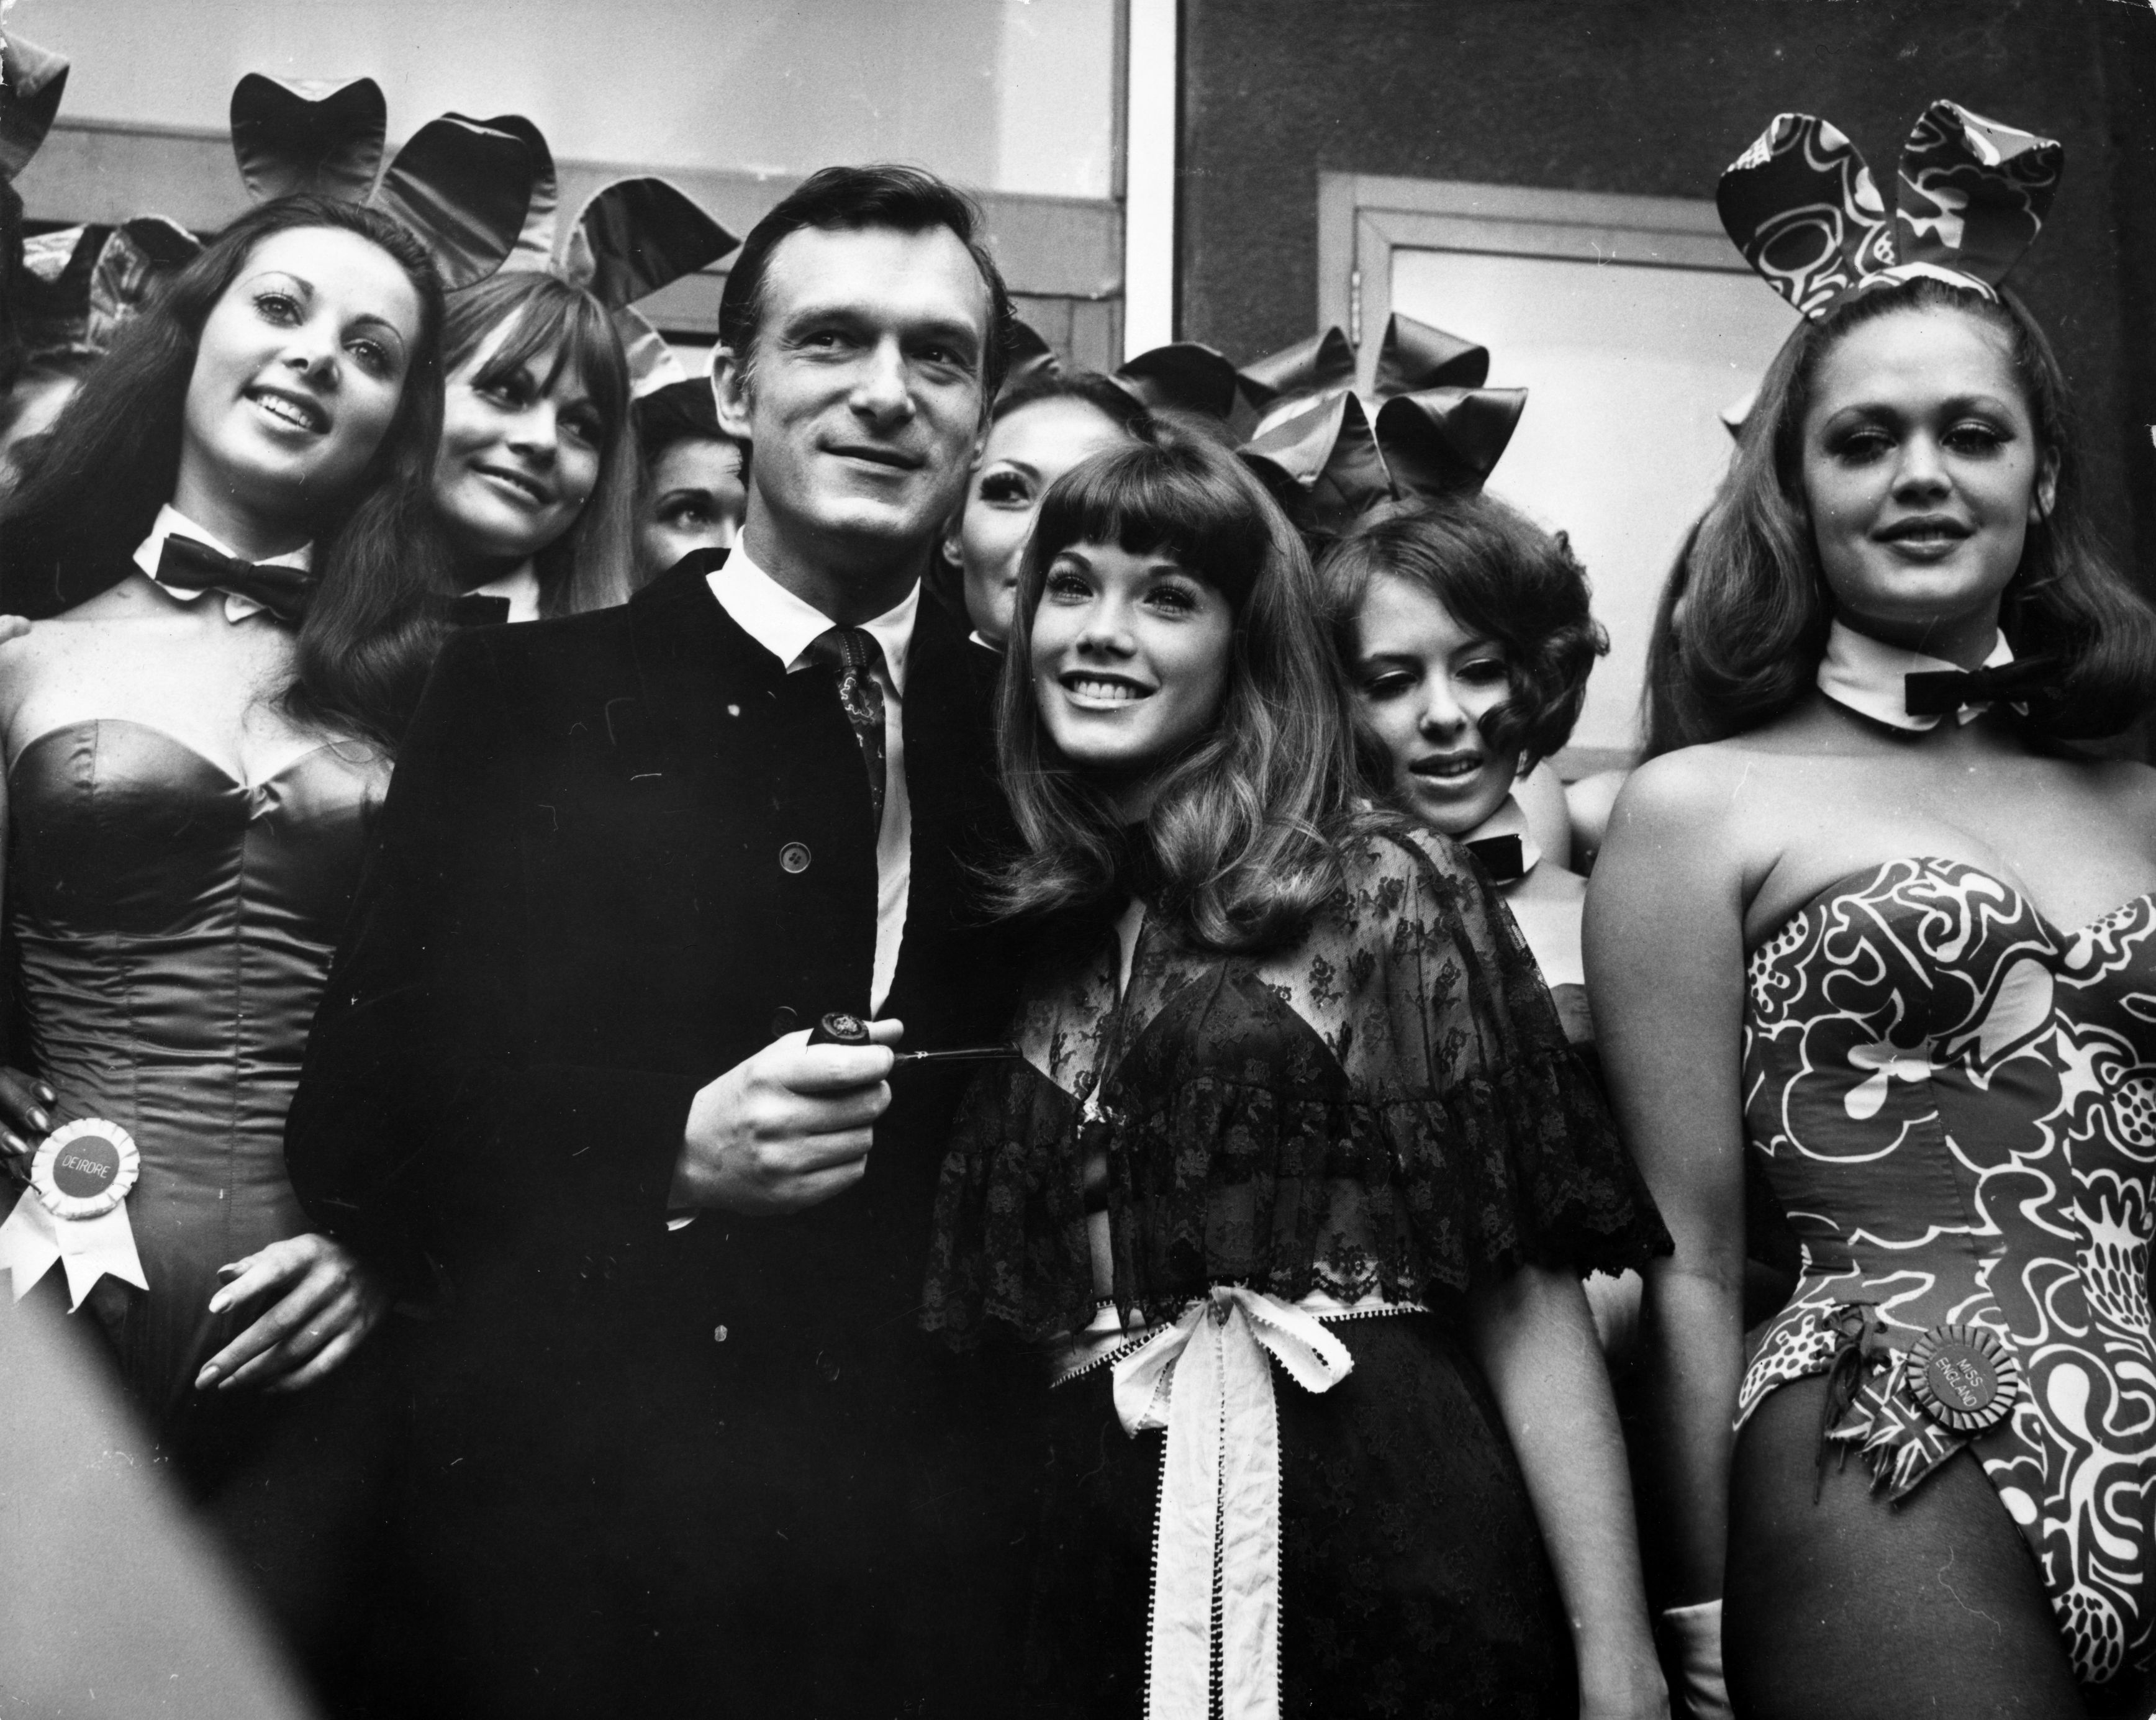 Passed Drunk Girls Orgy - Sedatives, orgies and bestiality: The documentary that shines a light on  historical abuse at Hugh Hefner's Playboy mansion | U.S. | EL PAÃS English